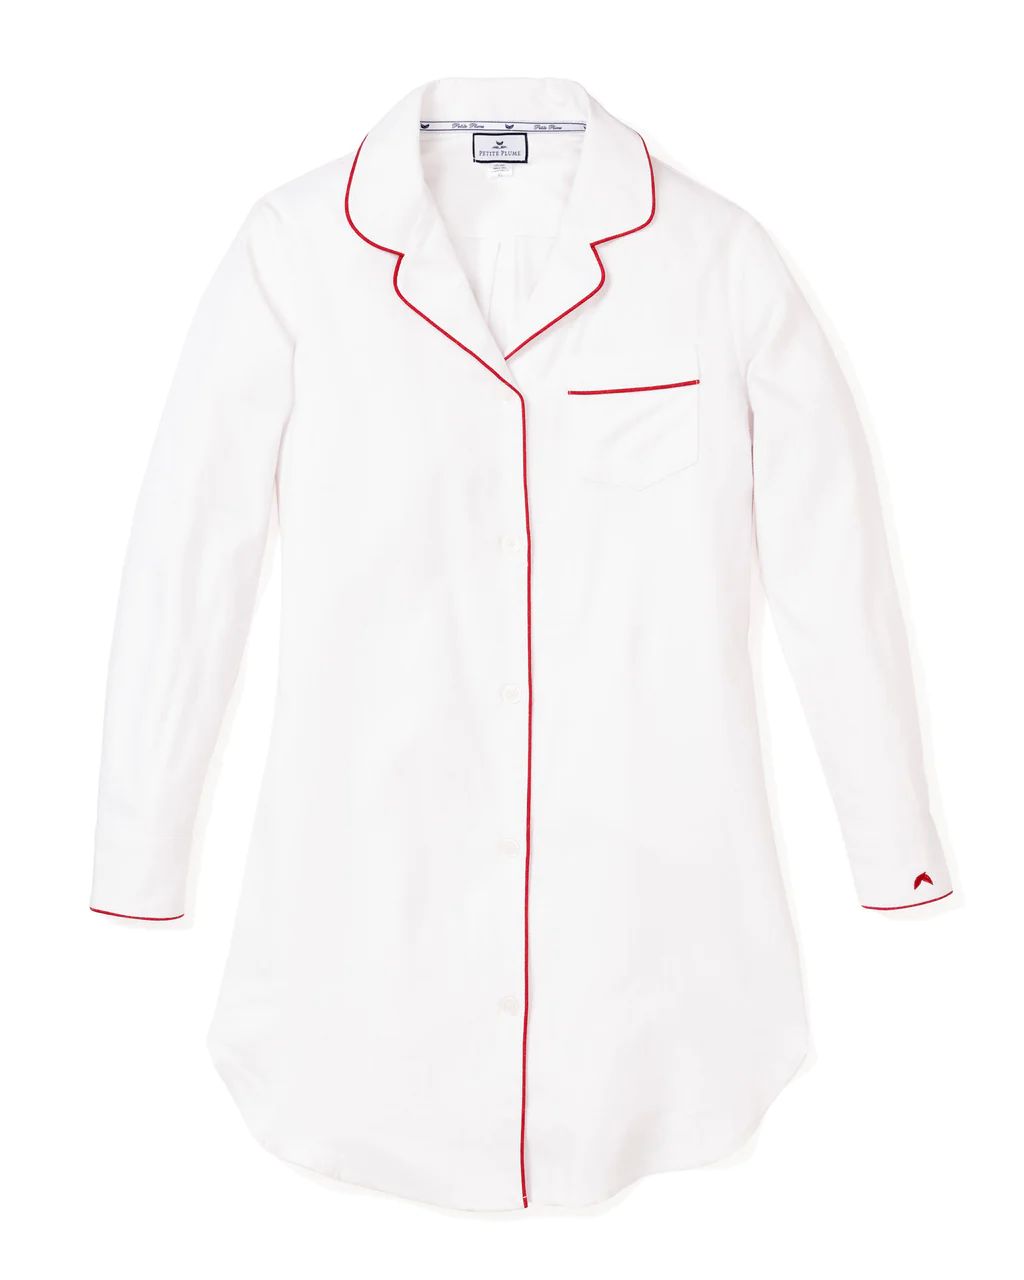 Women's White Twill Nightshirt with Red Piping | Petite Plume